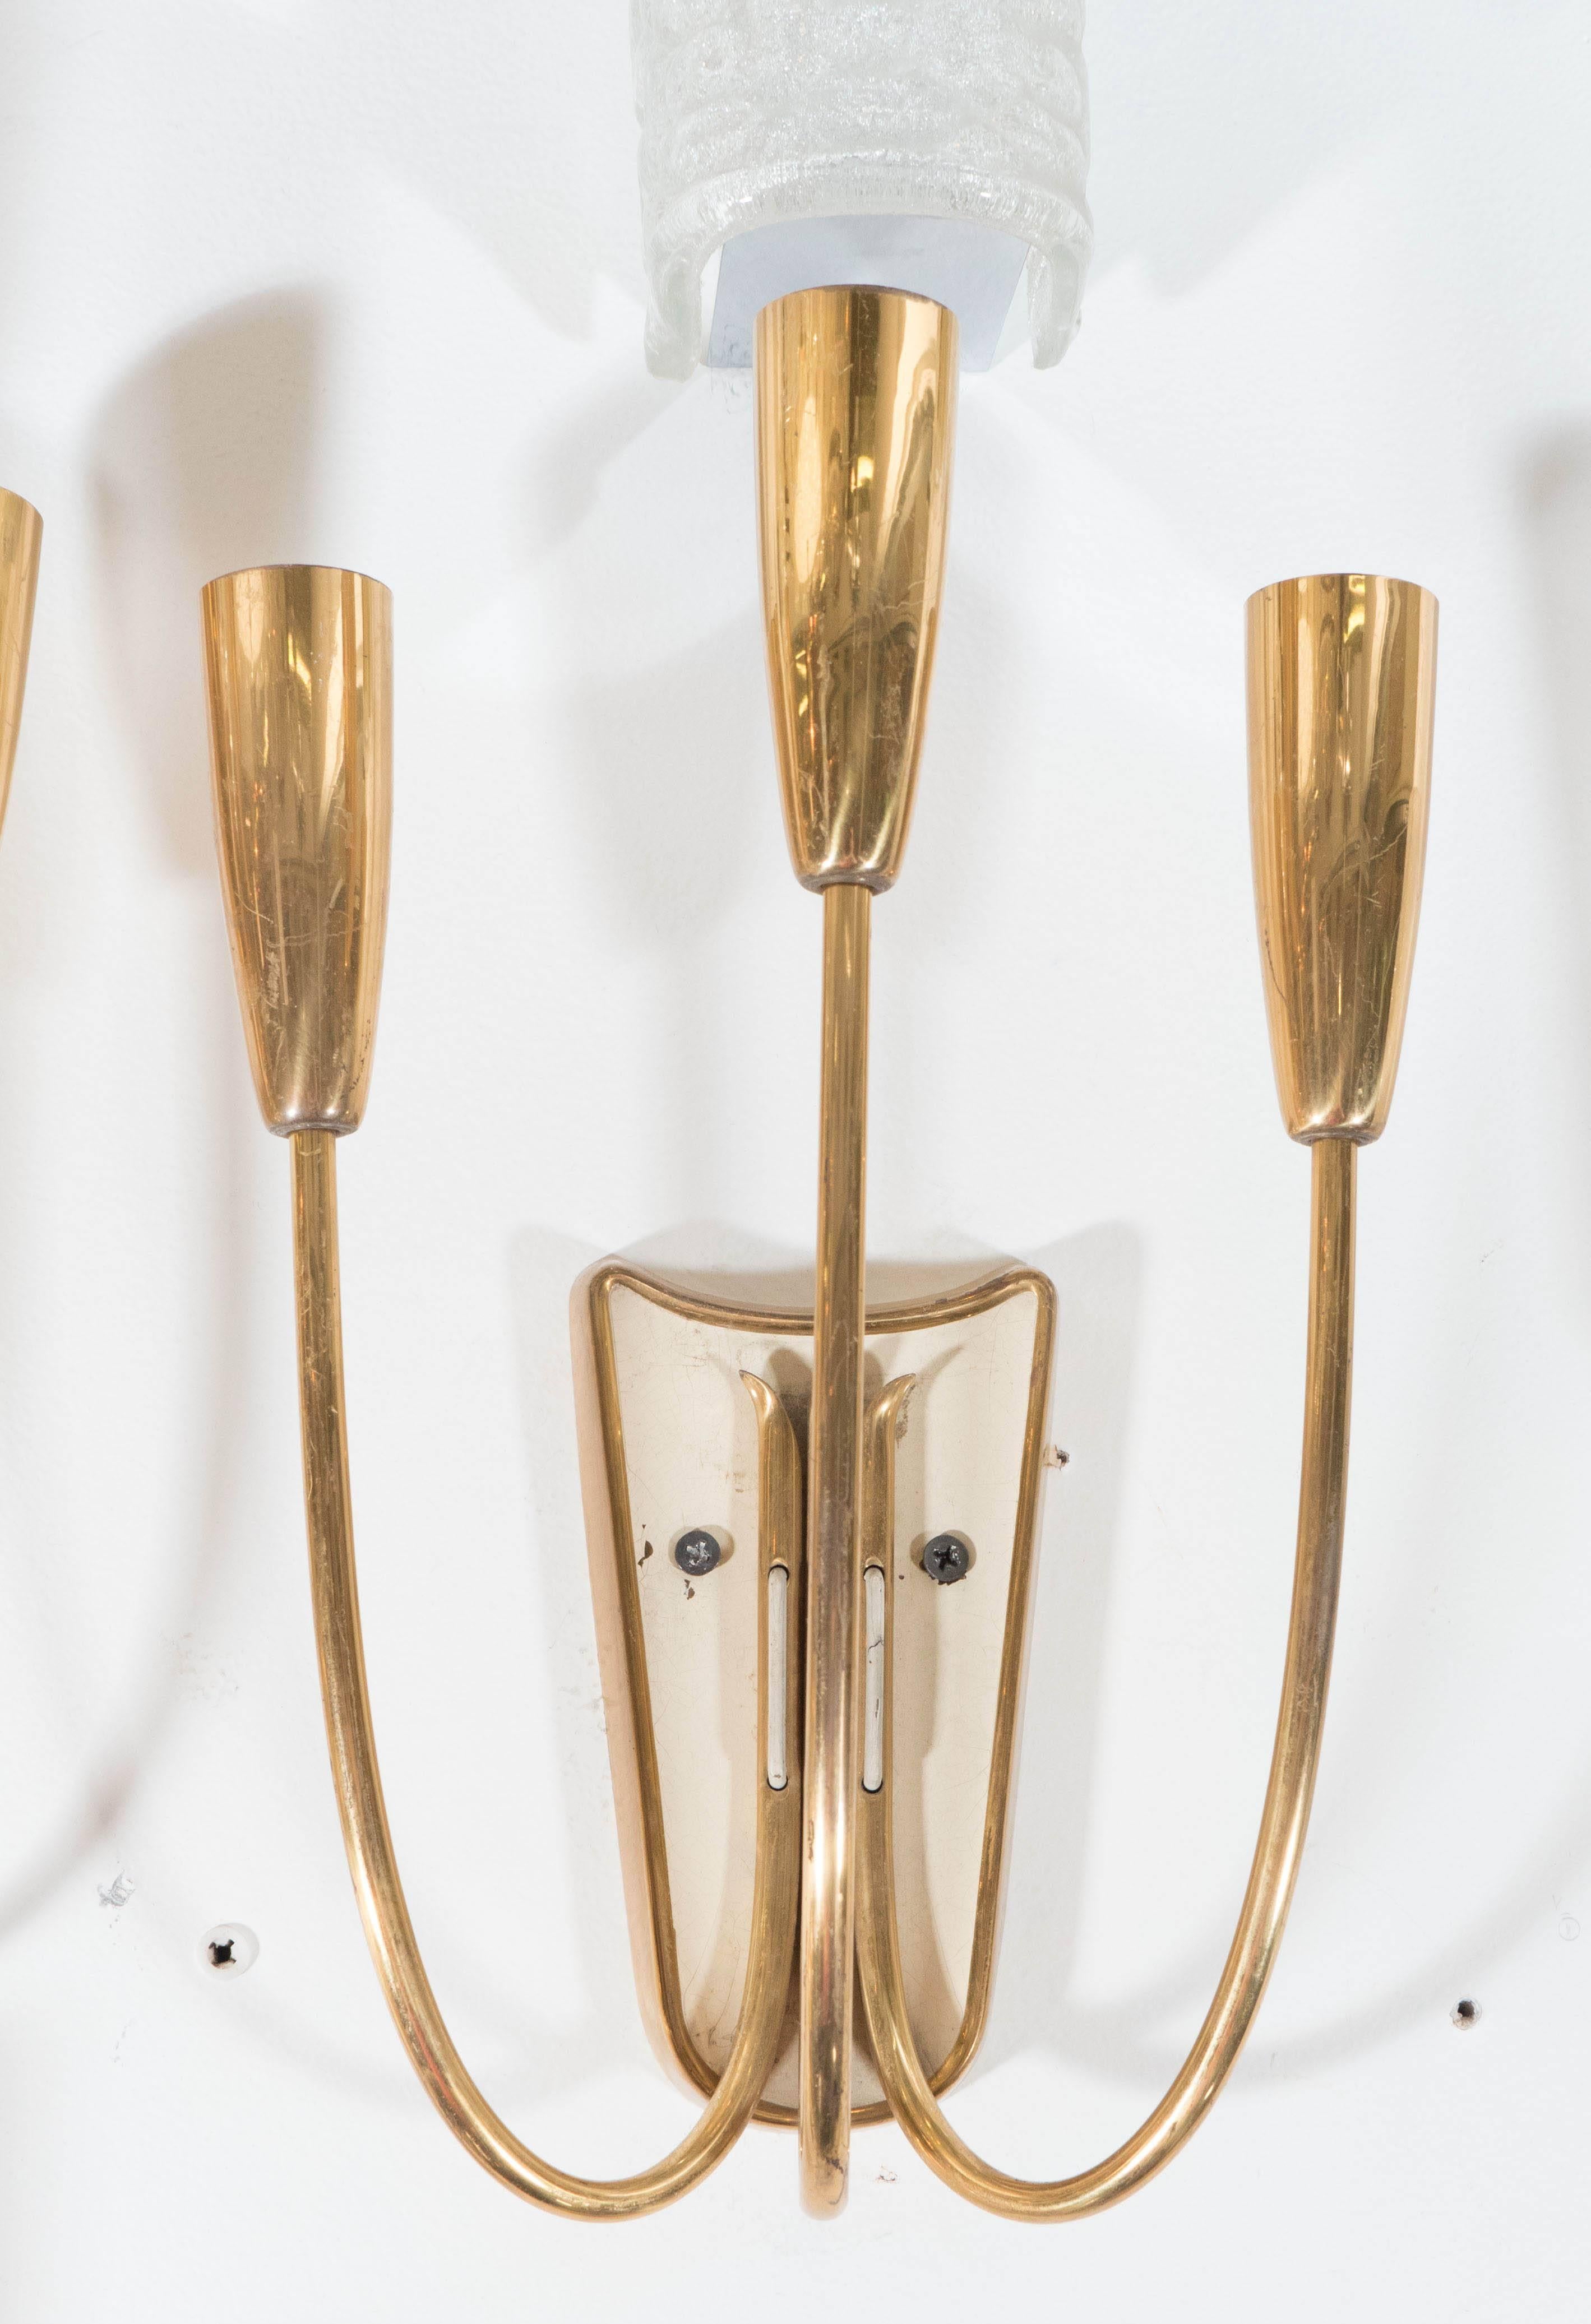 Modern style brass candelabra sconces, designed in the manner of Stilnovo, with rounded socket covers and curved stems, affixed to shield form back plates in cream colored enamel. Wiring and sockets to European standard, requires three candelabra